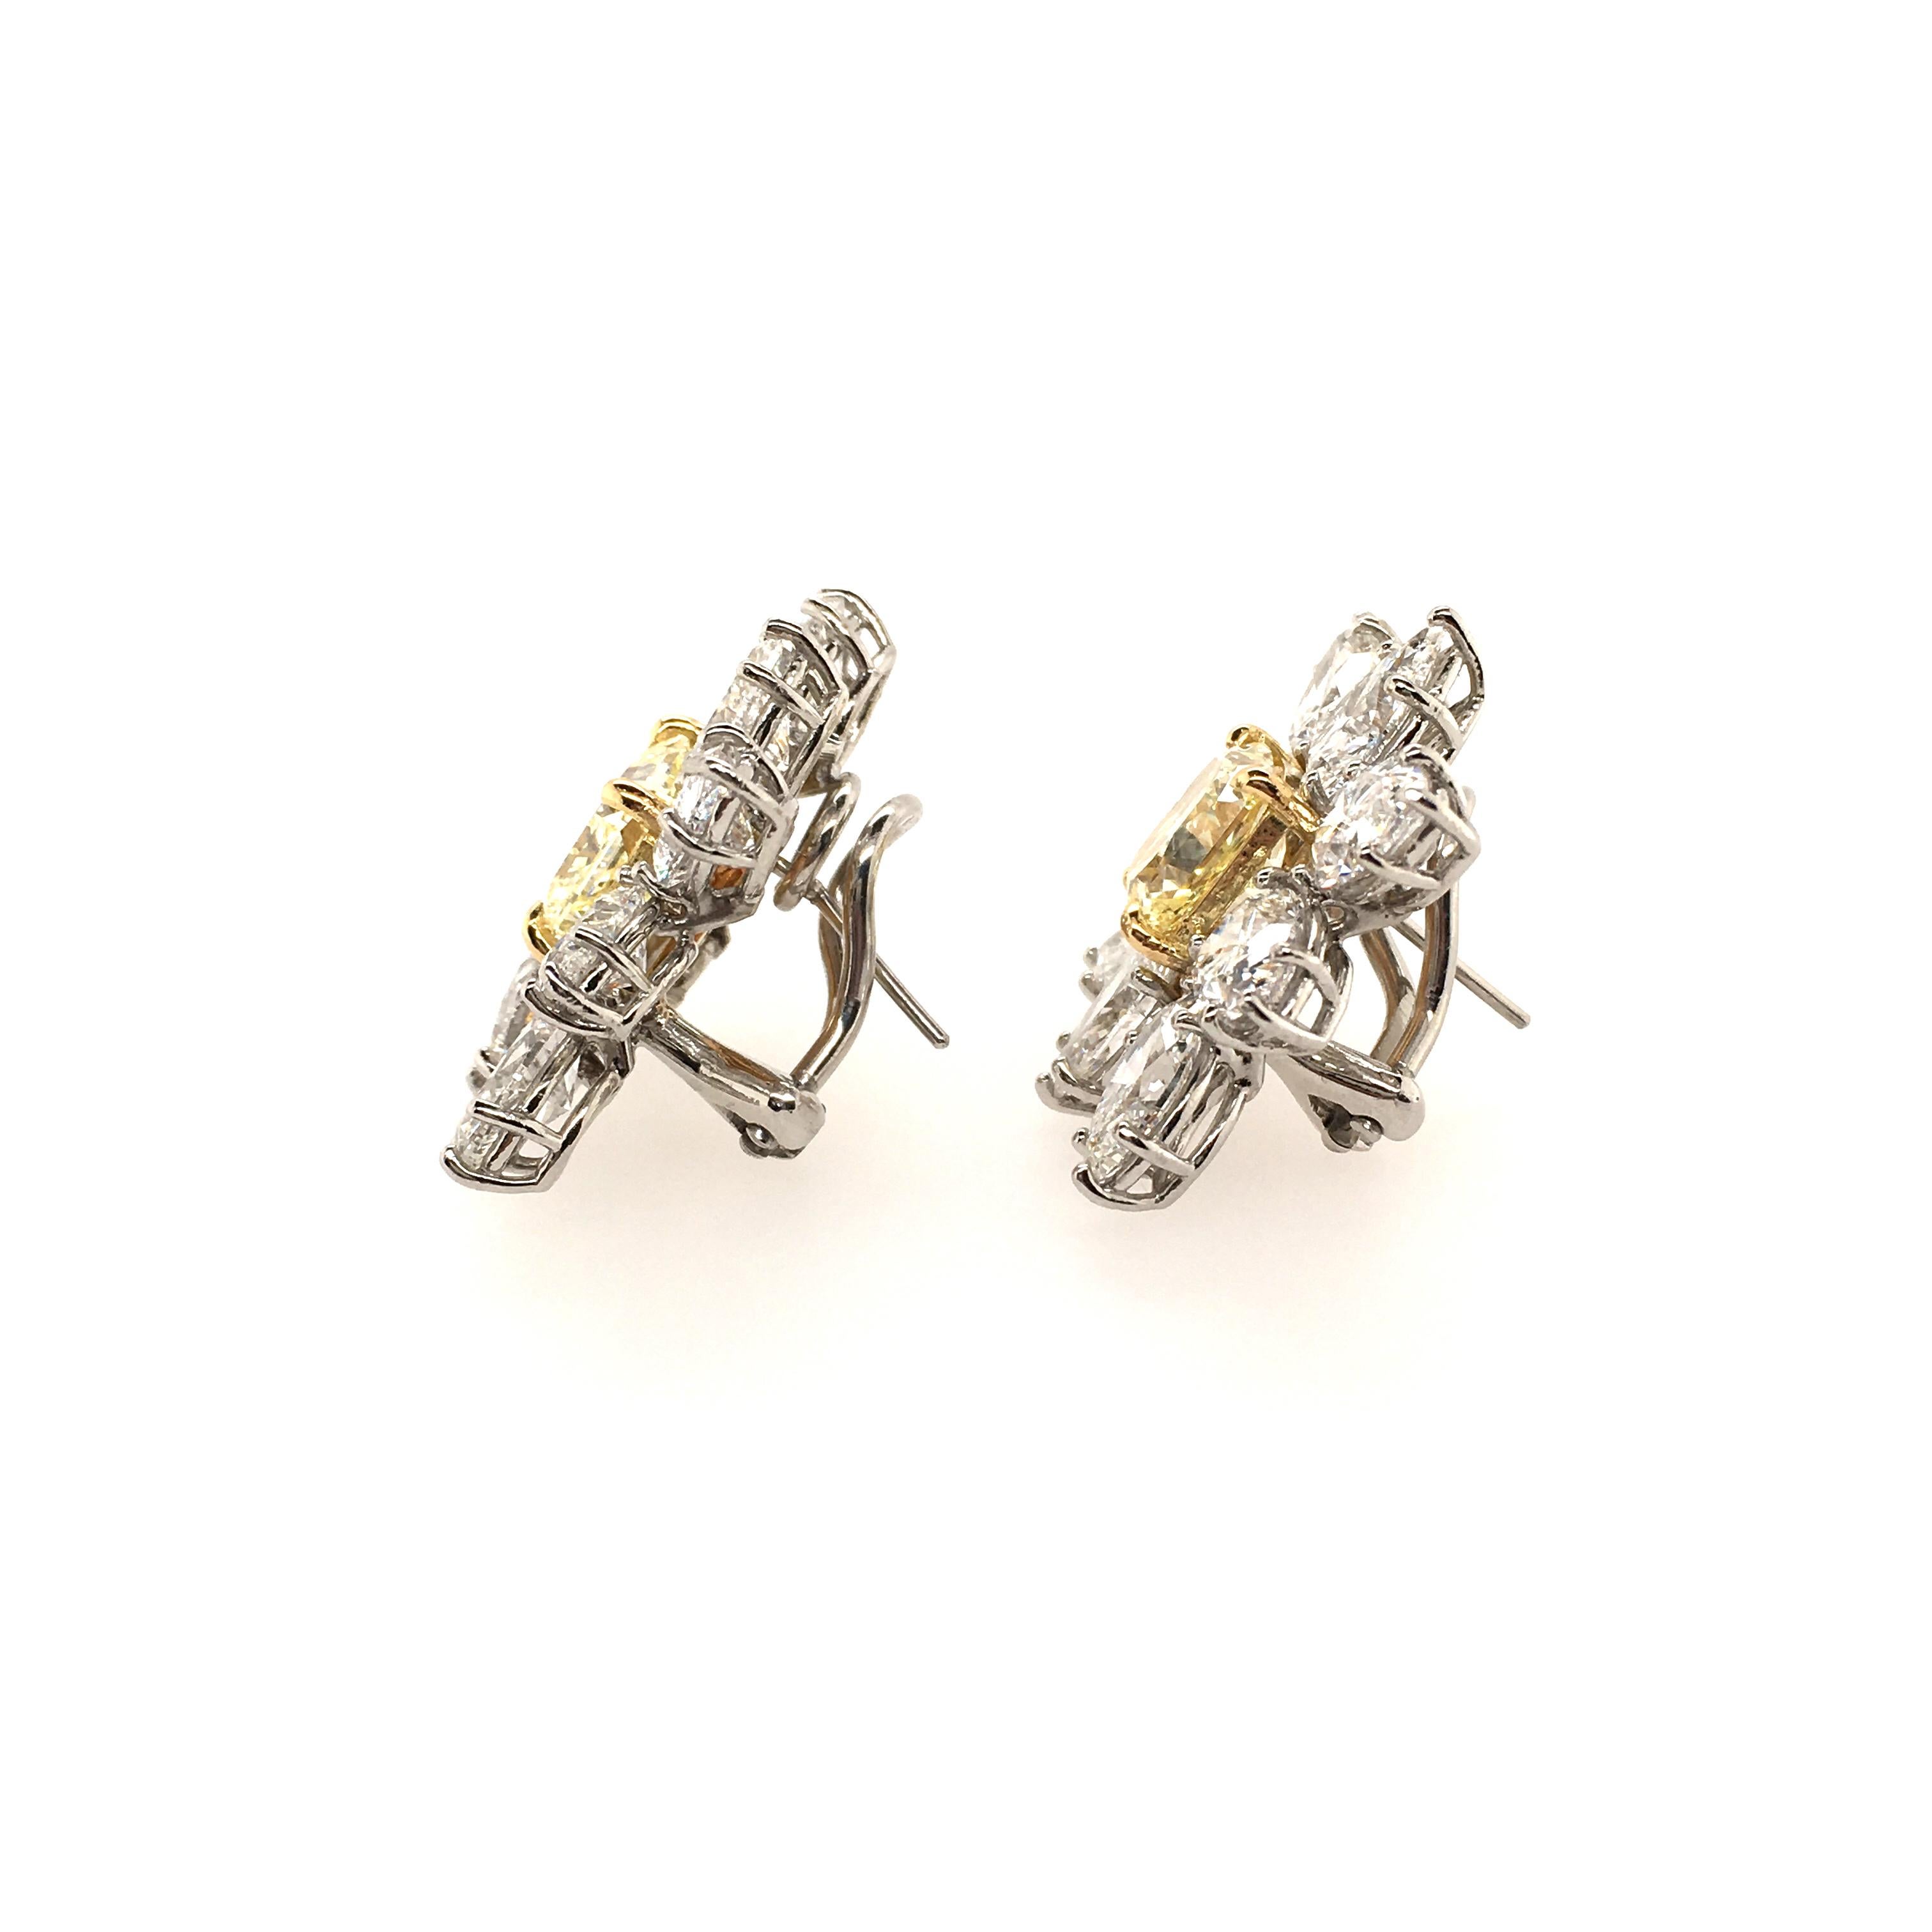 A pair of platinum, 18 karat yellow gold, fancy yellow diamond and diamond earrings. Each set with a fancy yellow cut cornered square modified brilliant, within a pear and marquise cut diamond surround. Fancy yellow diamonds weigh 2.38 and 2.49